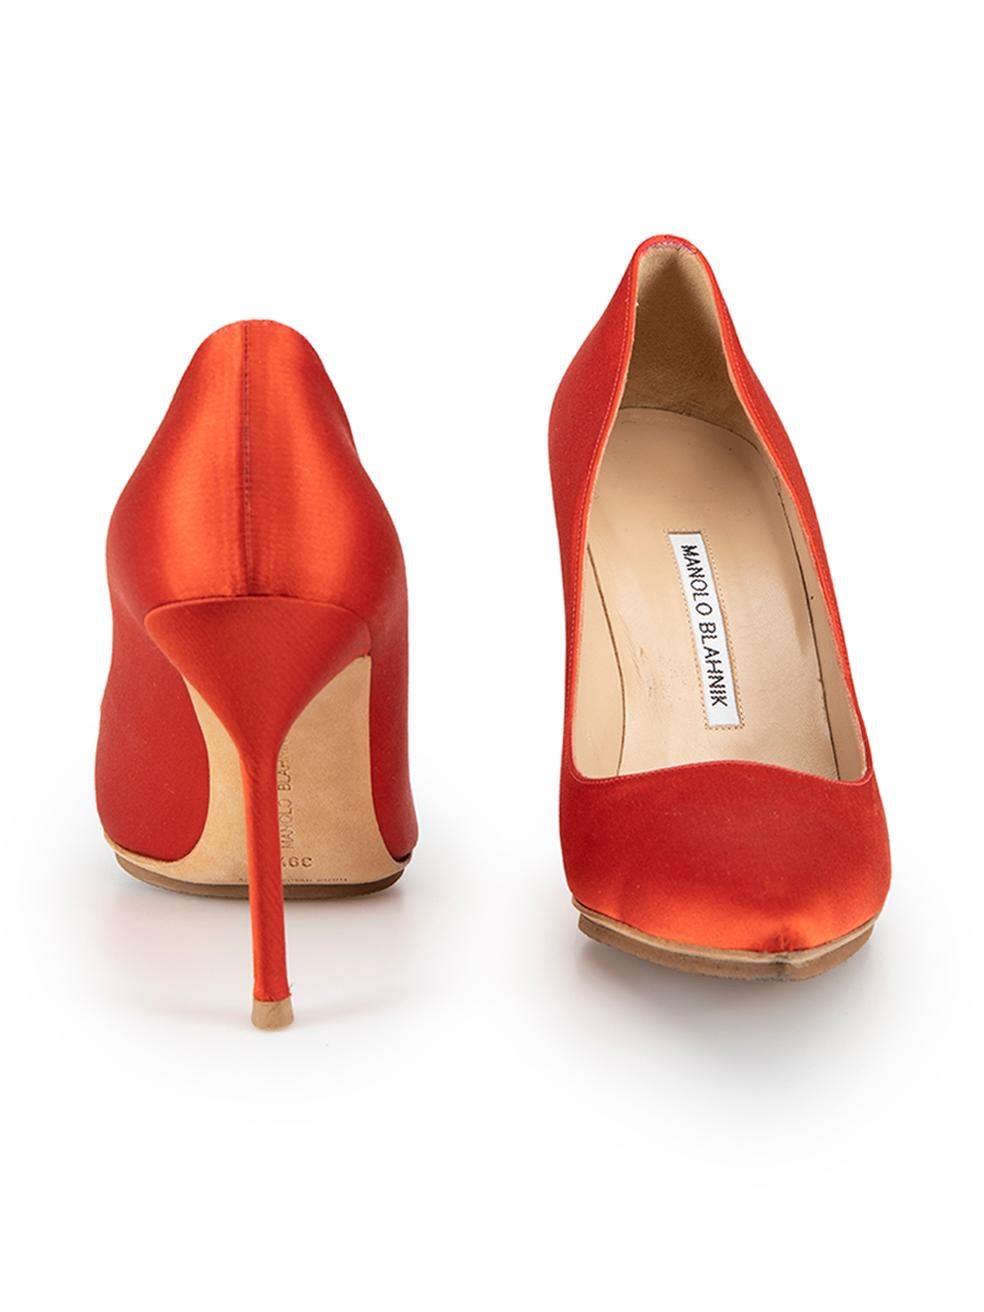 Manolo Blahnik Women's Red Satin Slip On Pumps In Good Condition For Sale In London, GB